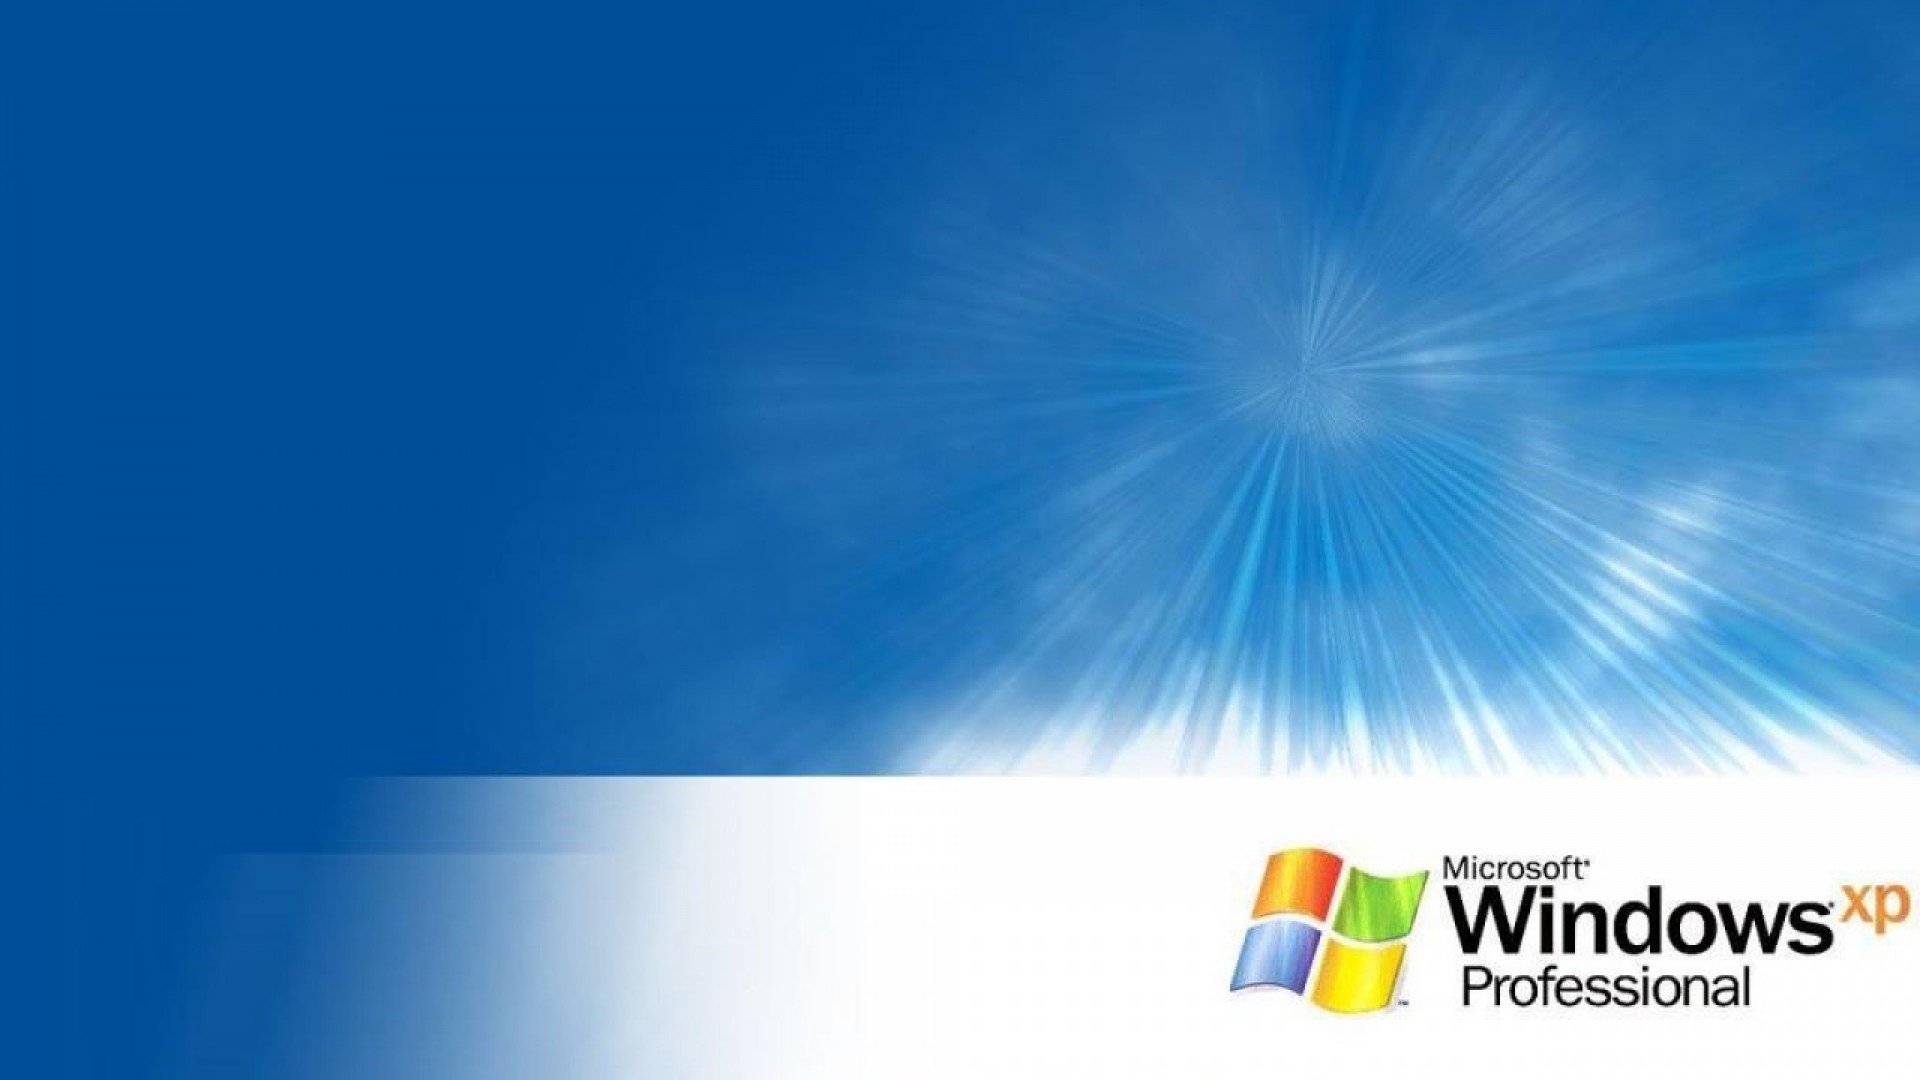 Windows Xp Wallpapers 1920x1080 Group 84